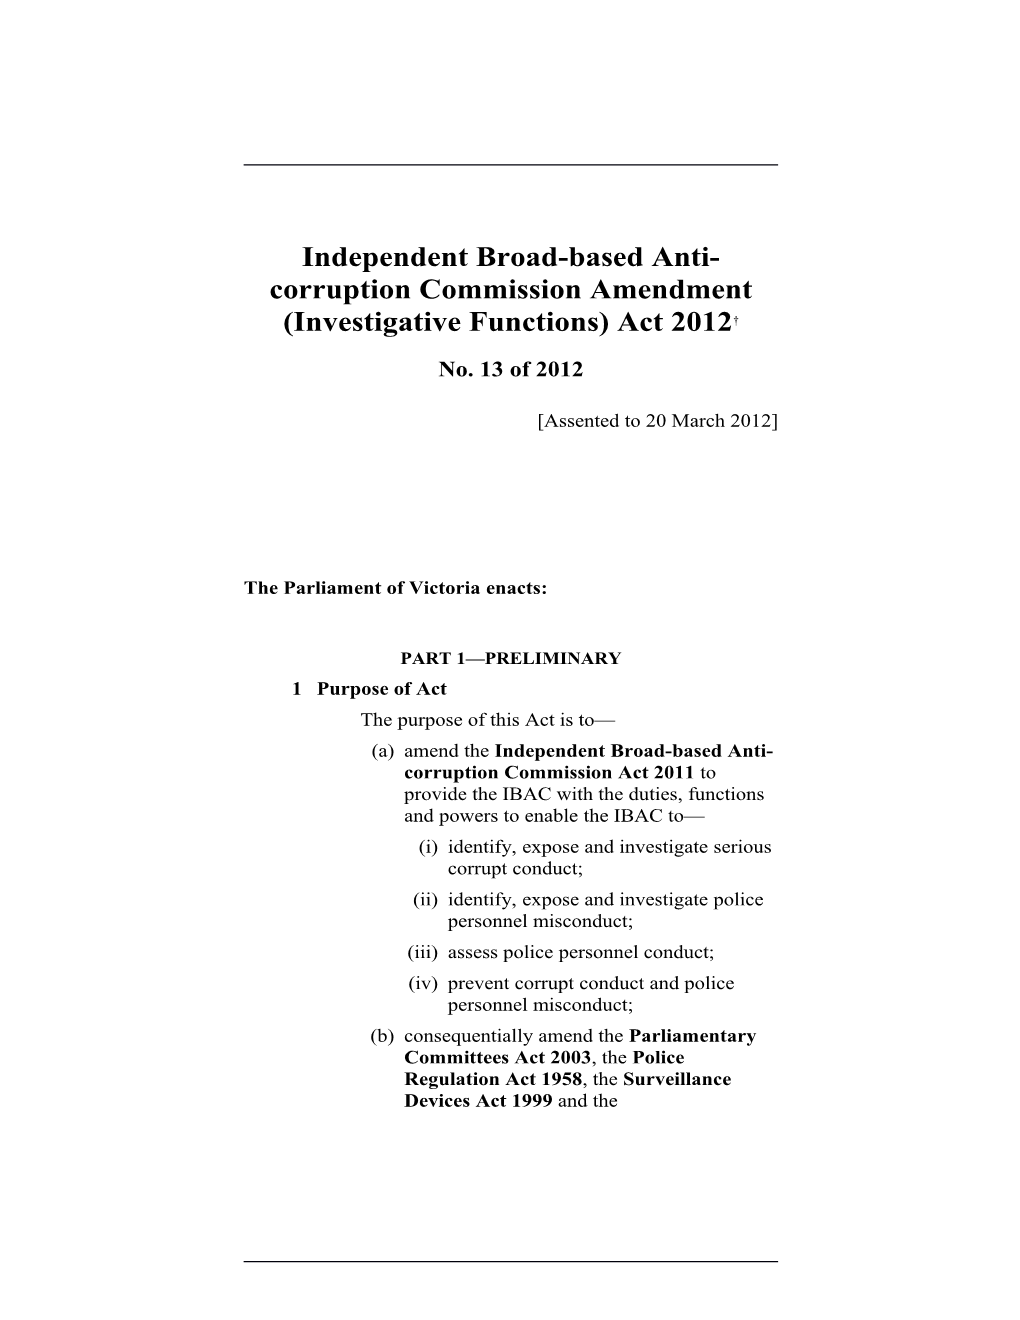 Independent Broad-Based Anti-Corruption Commission Amendment (Investigative Functions) Act 2012